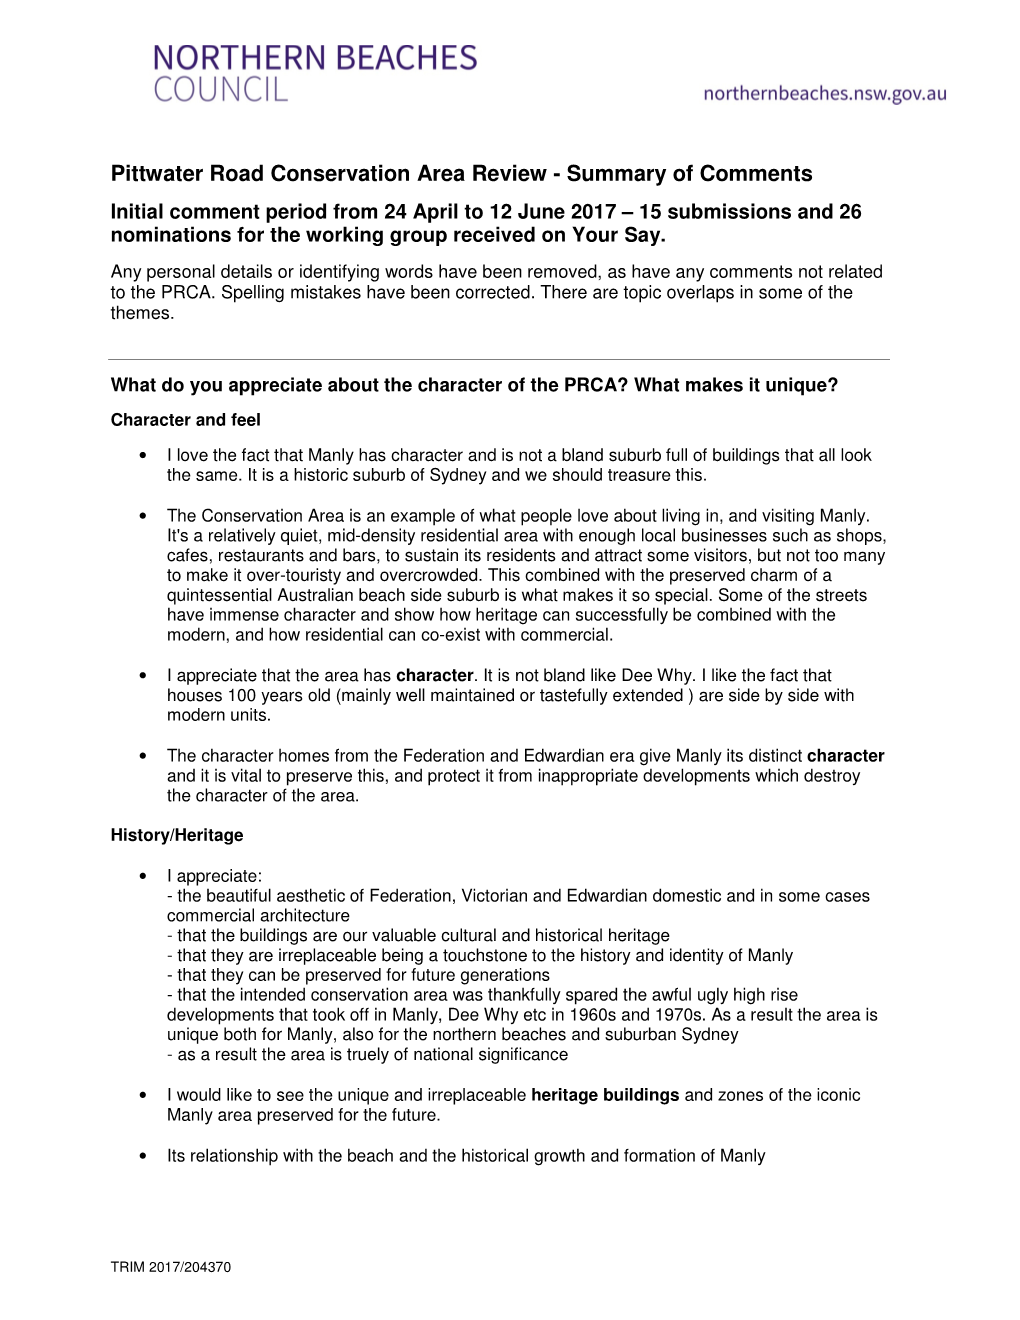 Pittwater Road Conservation Area Review